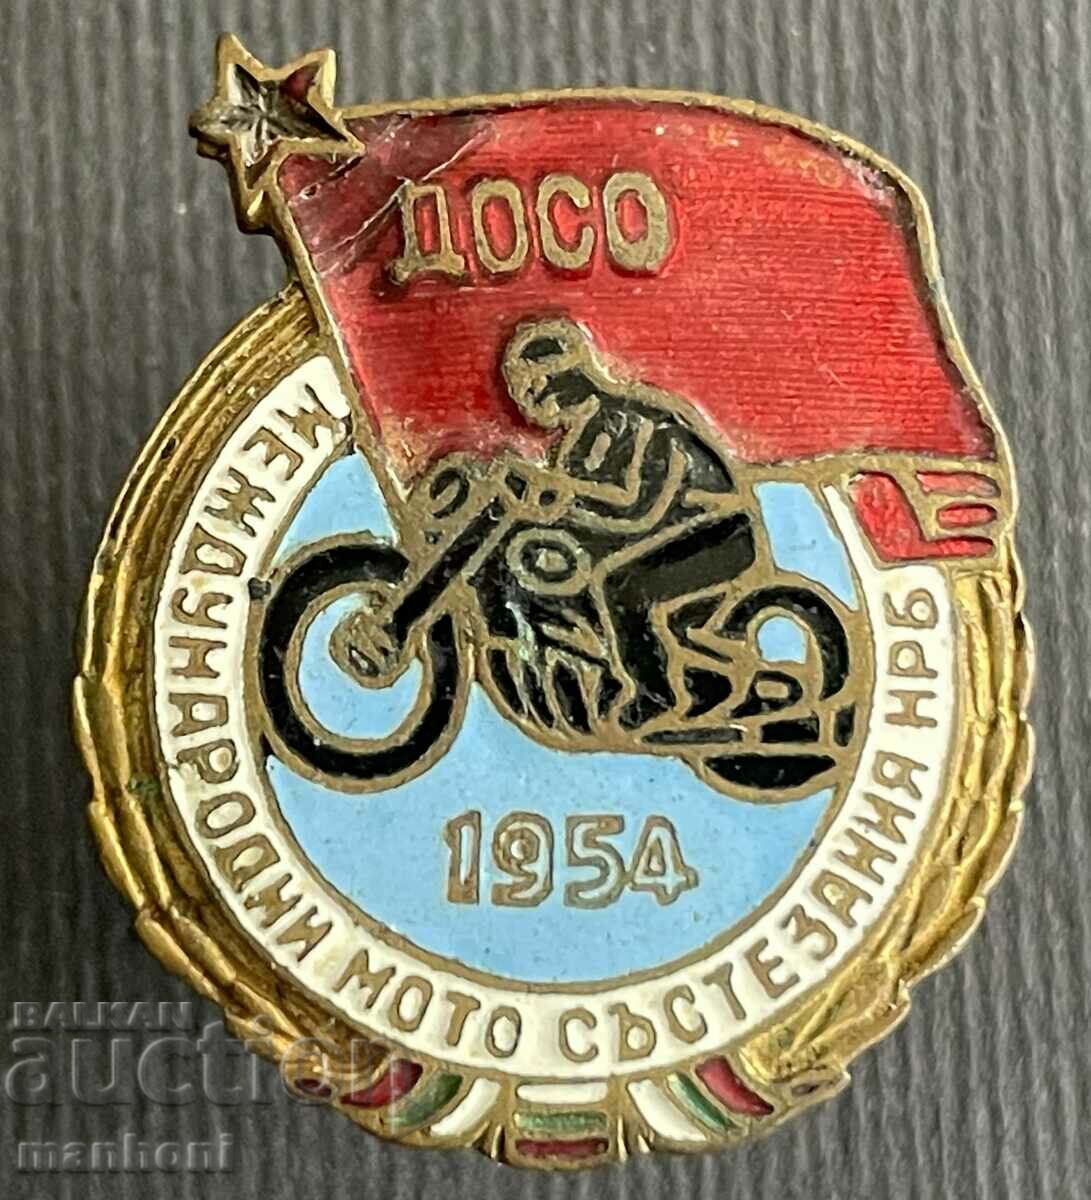 5606 Bulgaria International motorcycle competitions 1954 NRB DOSO ema